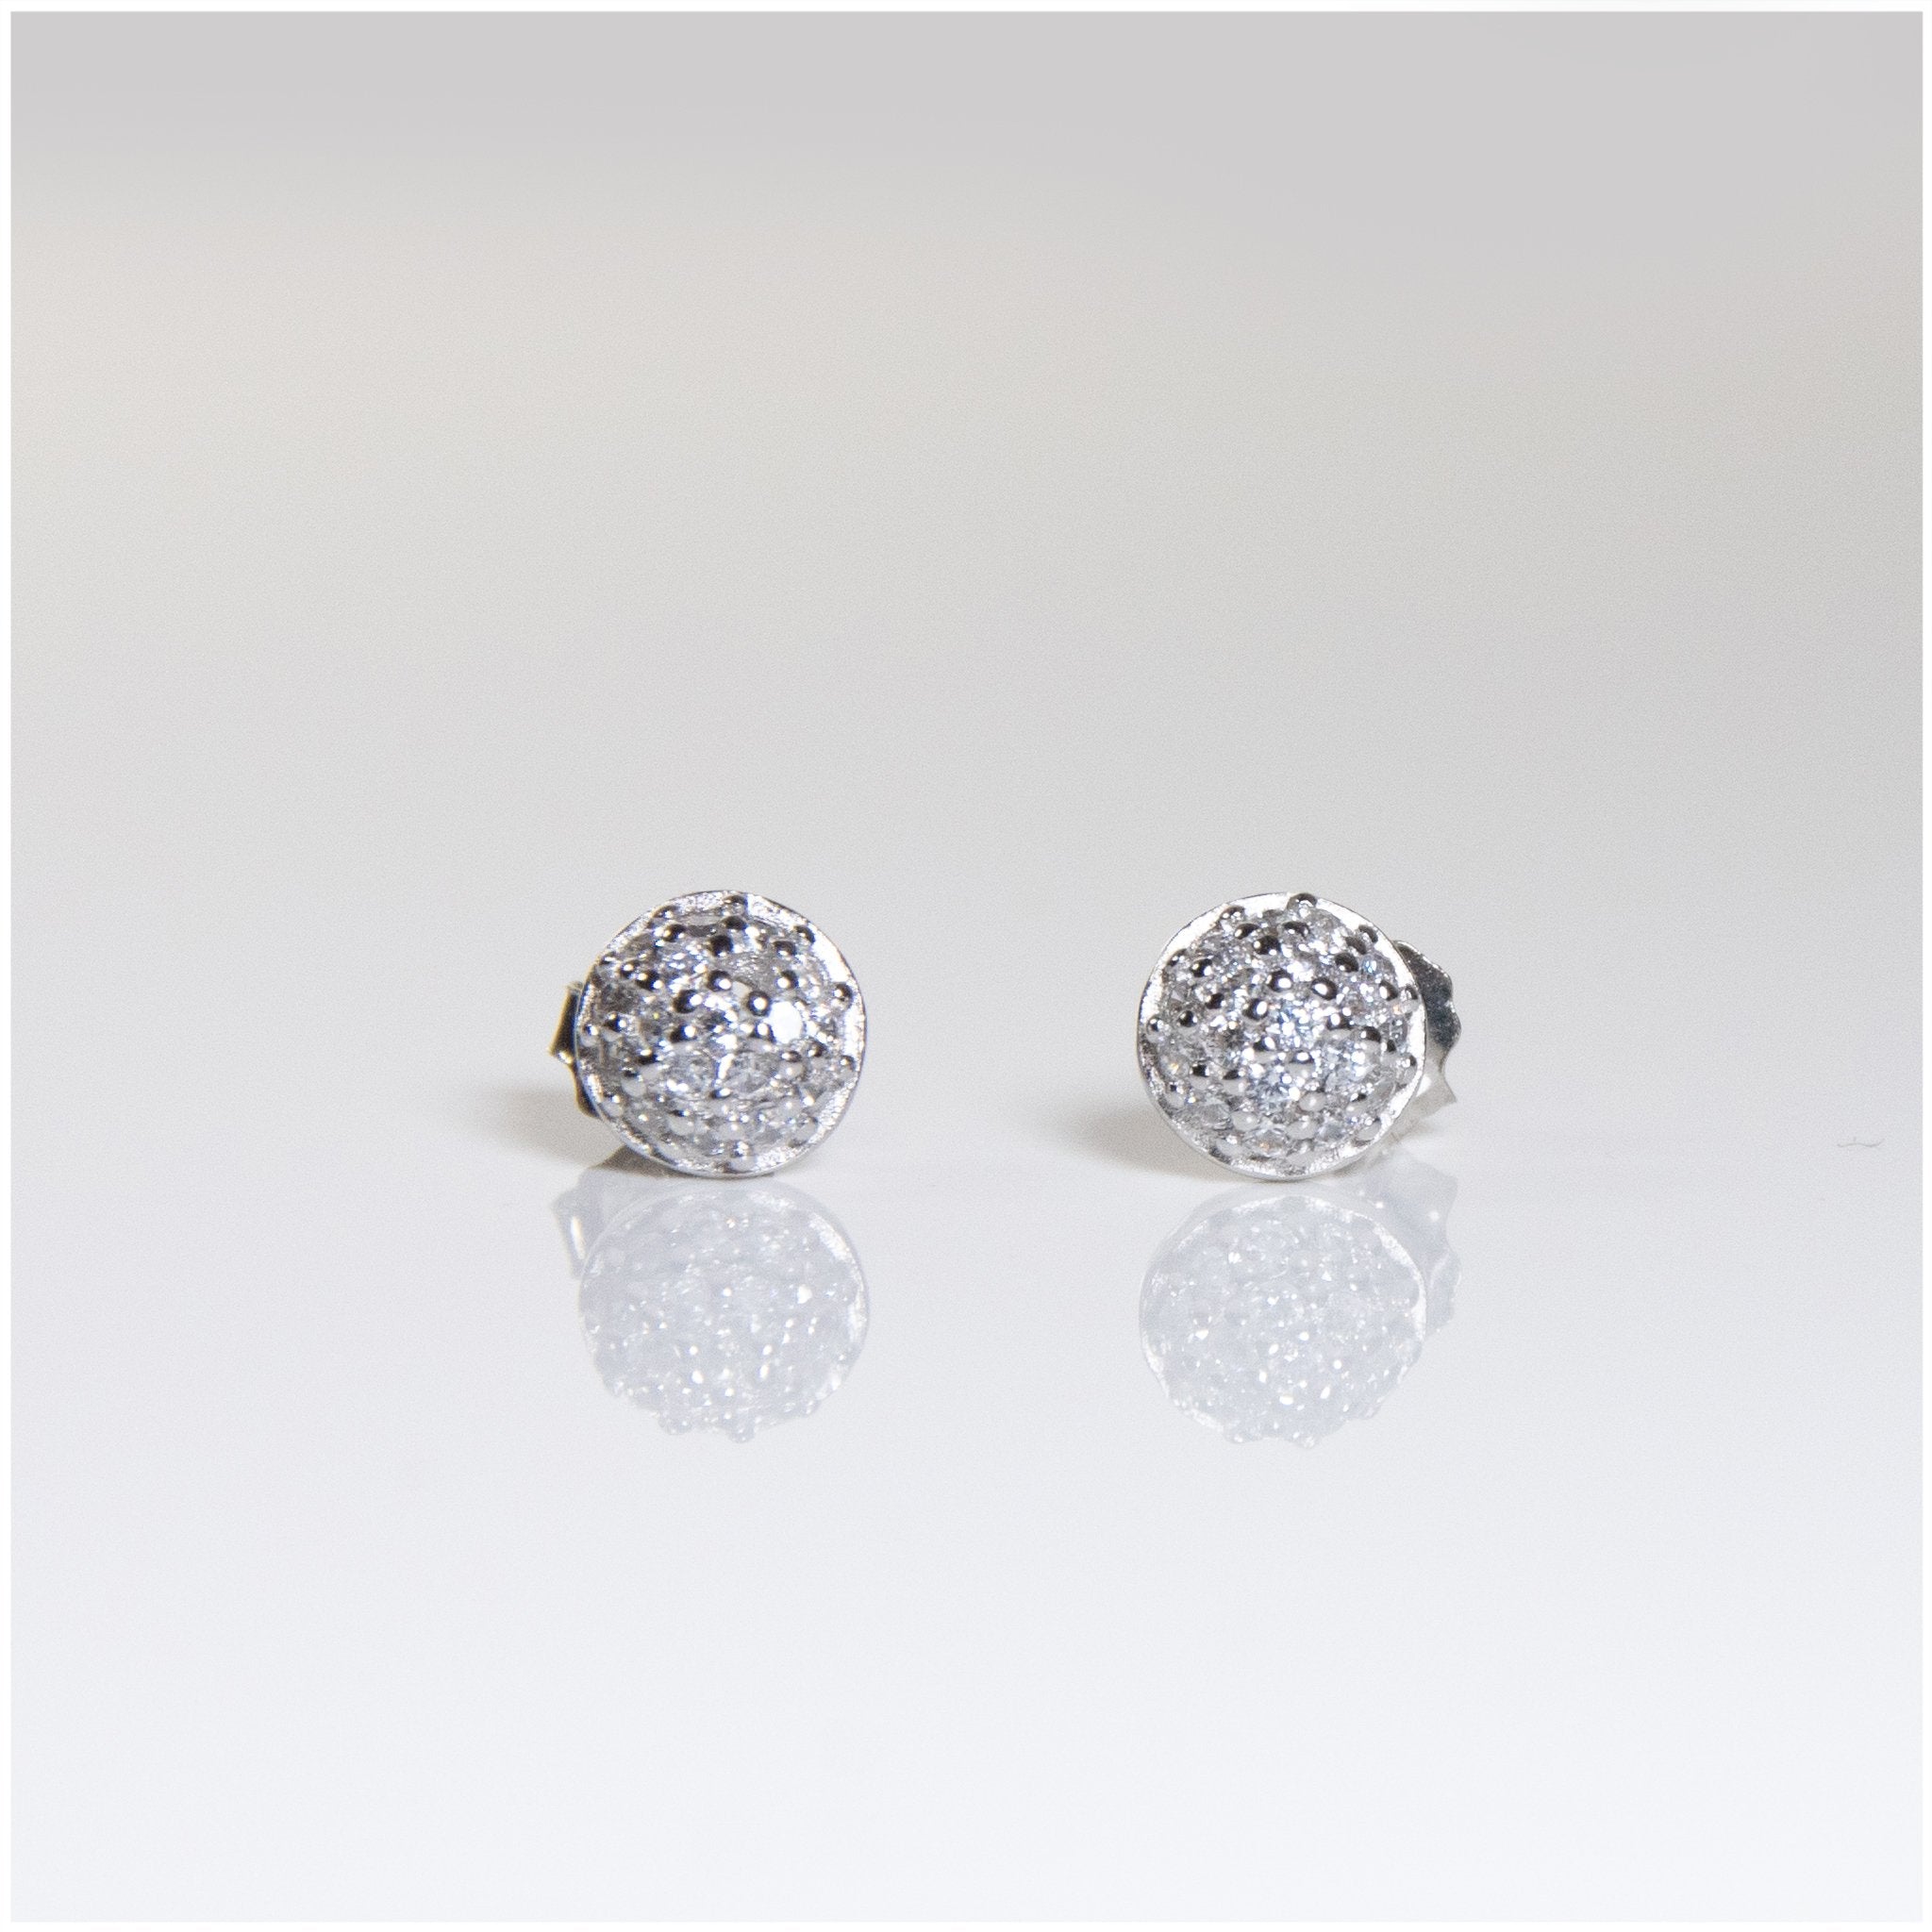 SES002 - Sterling Silver Stud Earrings with CZ